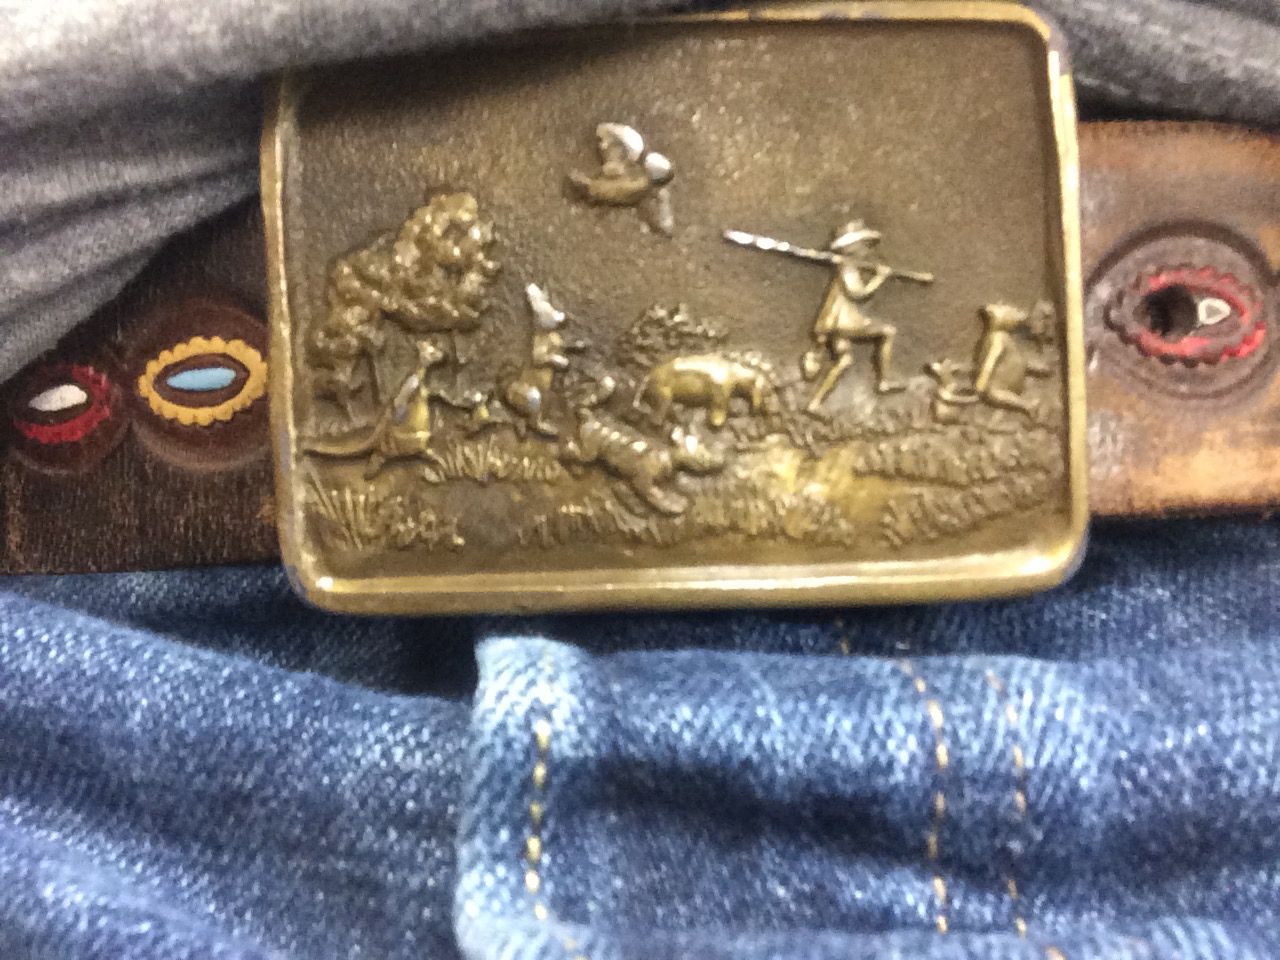 I will wear my Pooh buckle to the show. Why not? I wear it every day. 